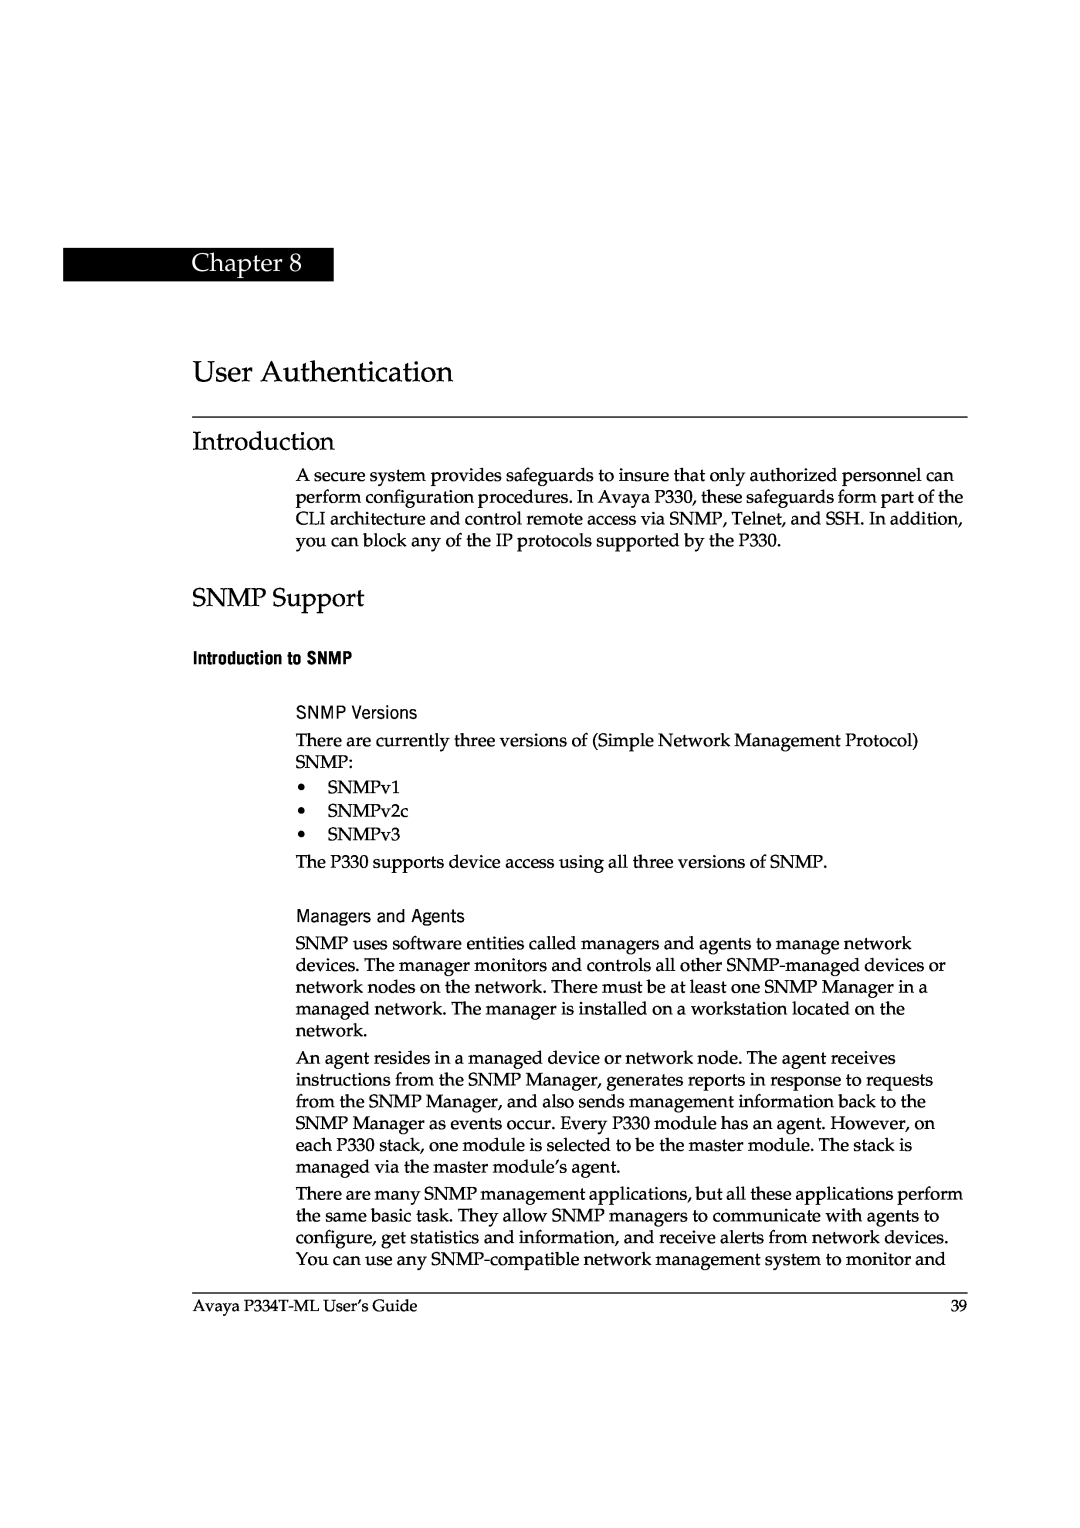 Avaya P3343T-ML manual User Authentication, SNMP Support, Introduction to SNMP, Chapter 